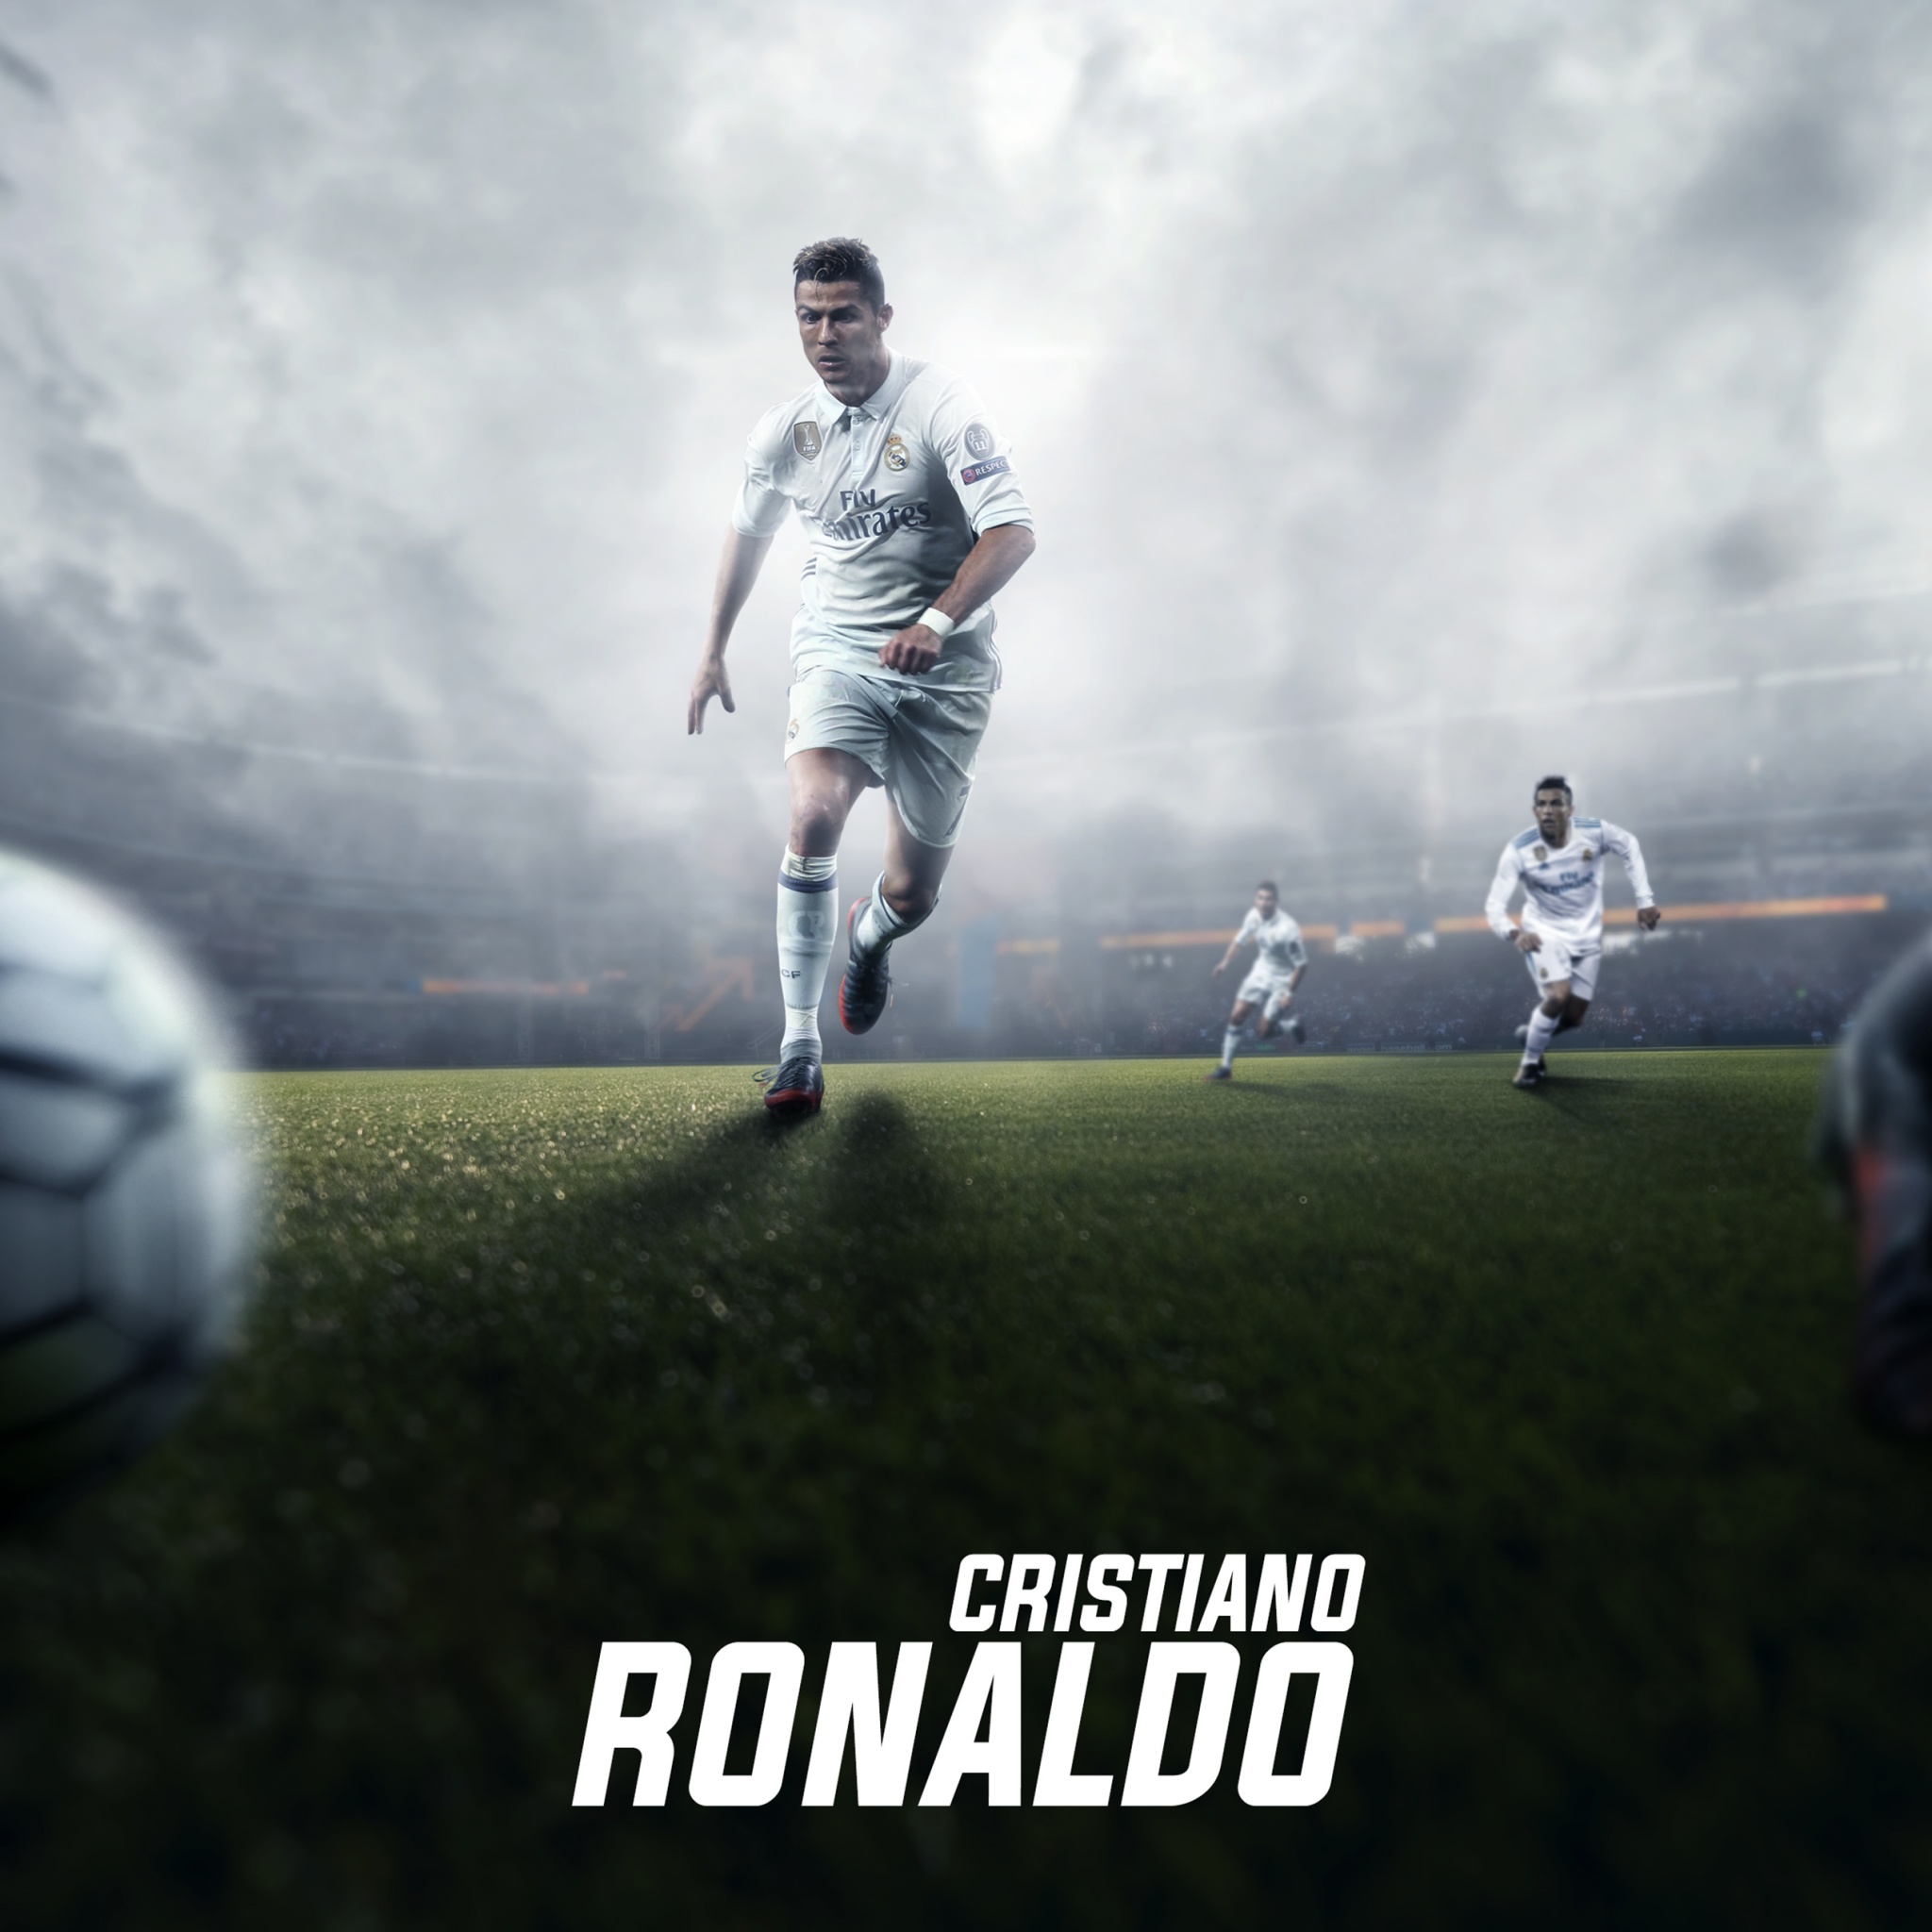 Cristiano Ronaldo Football Player Cool Wallpaper Poster Decorative Painting  Canvas Wall Art Living Room Posters Bedroom Painting 08x12inch20x30cm   Amazoncouk Home  Kitchen